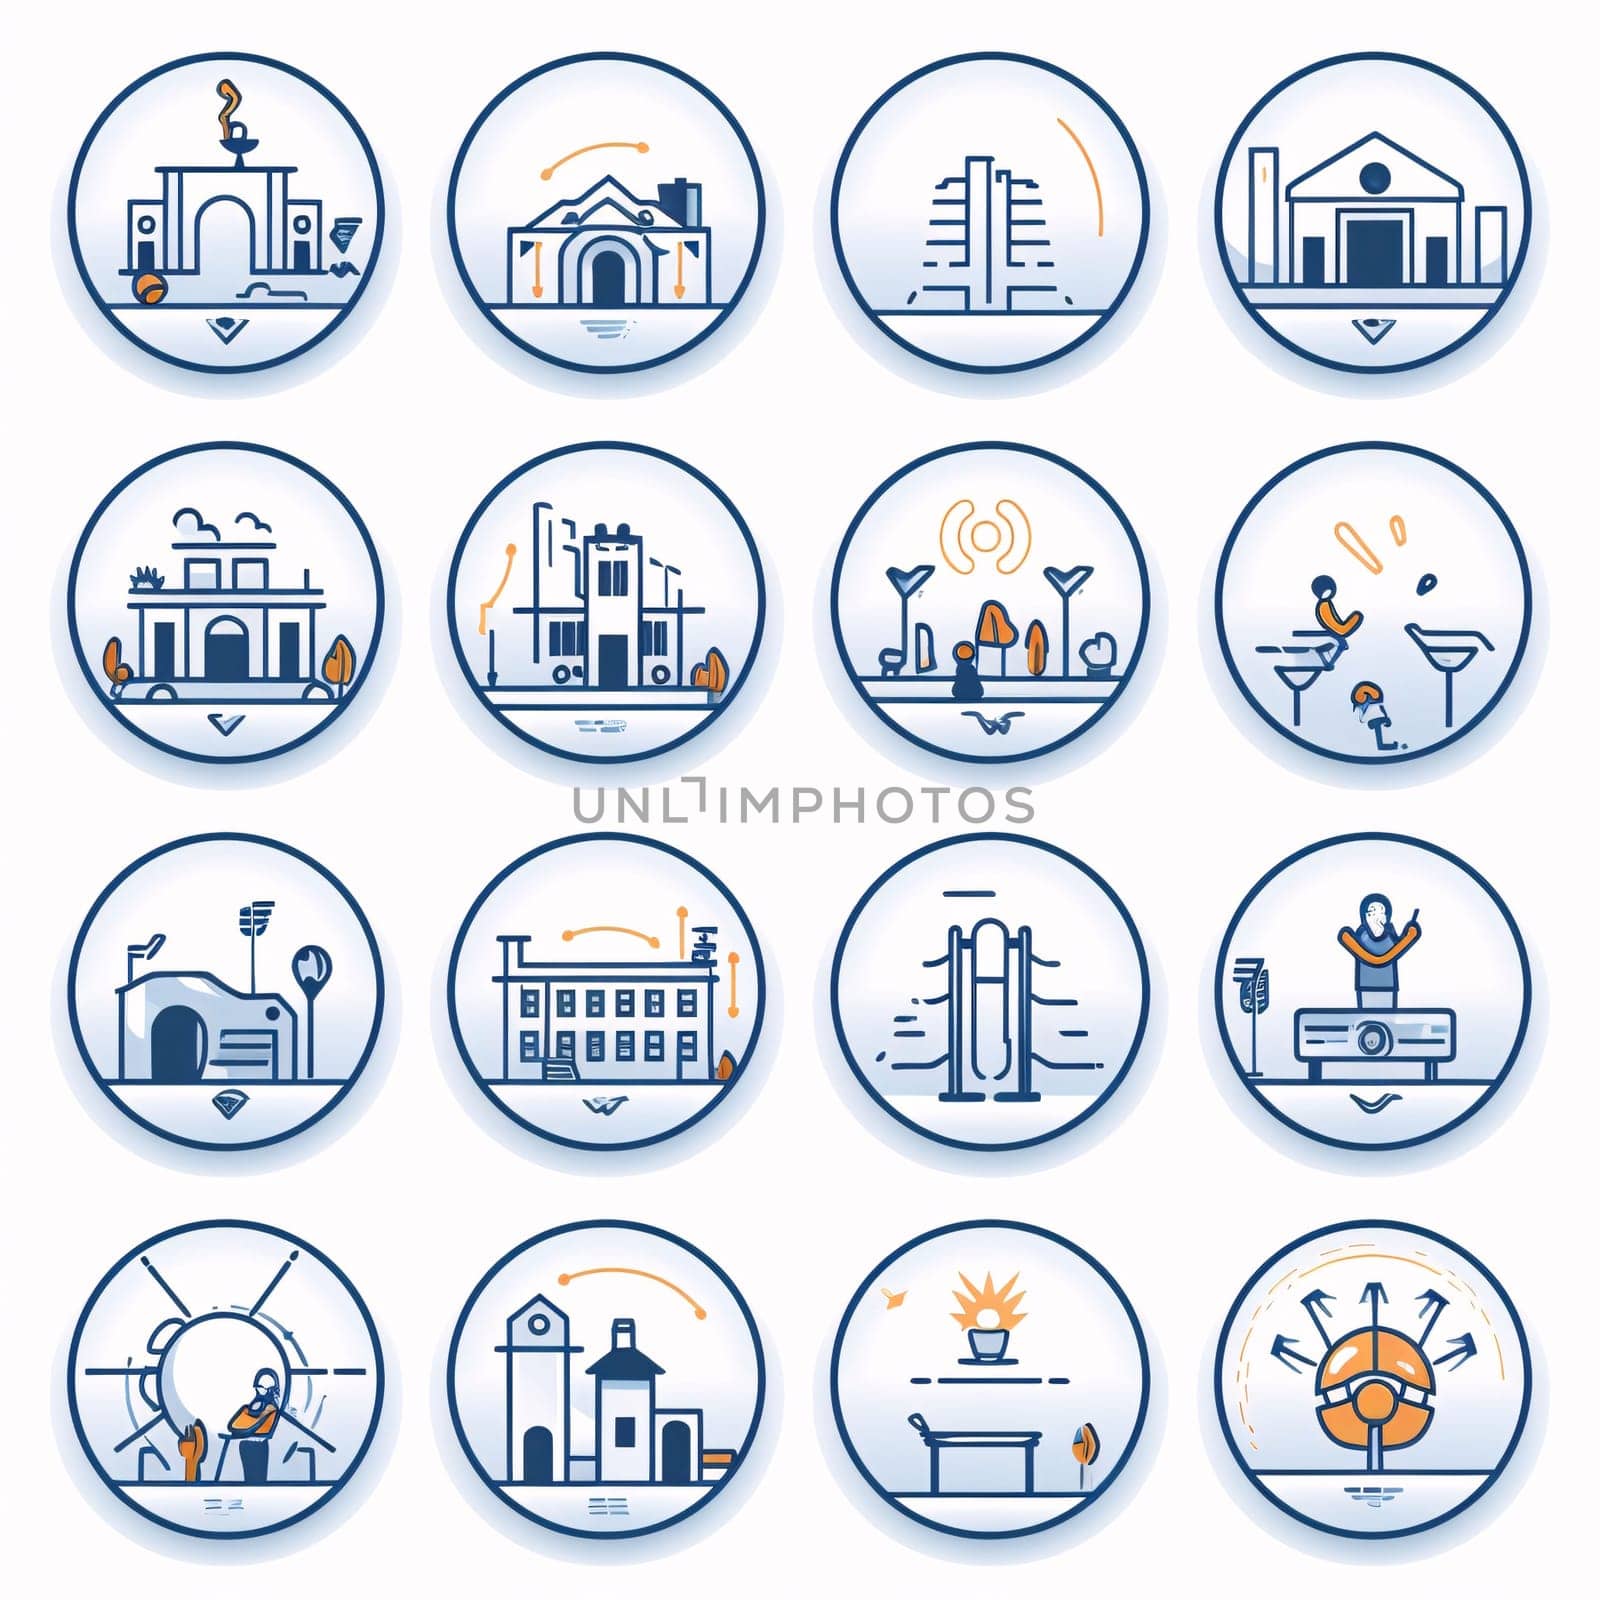 New icons collection: Set of travel and tourism icons in blue circles. Vector illustration.